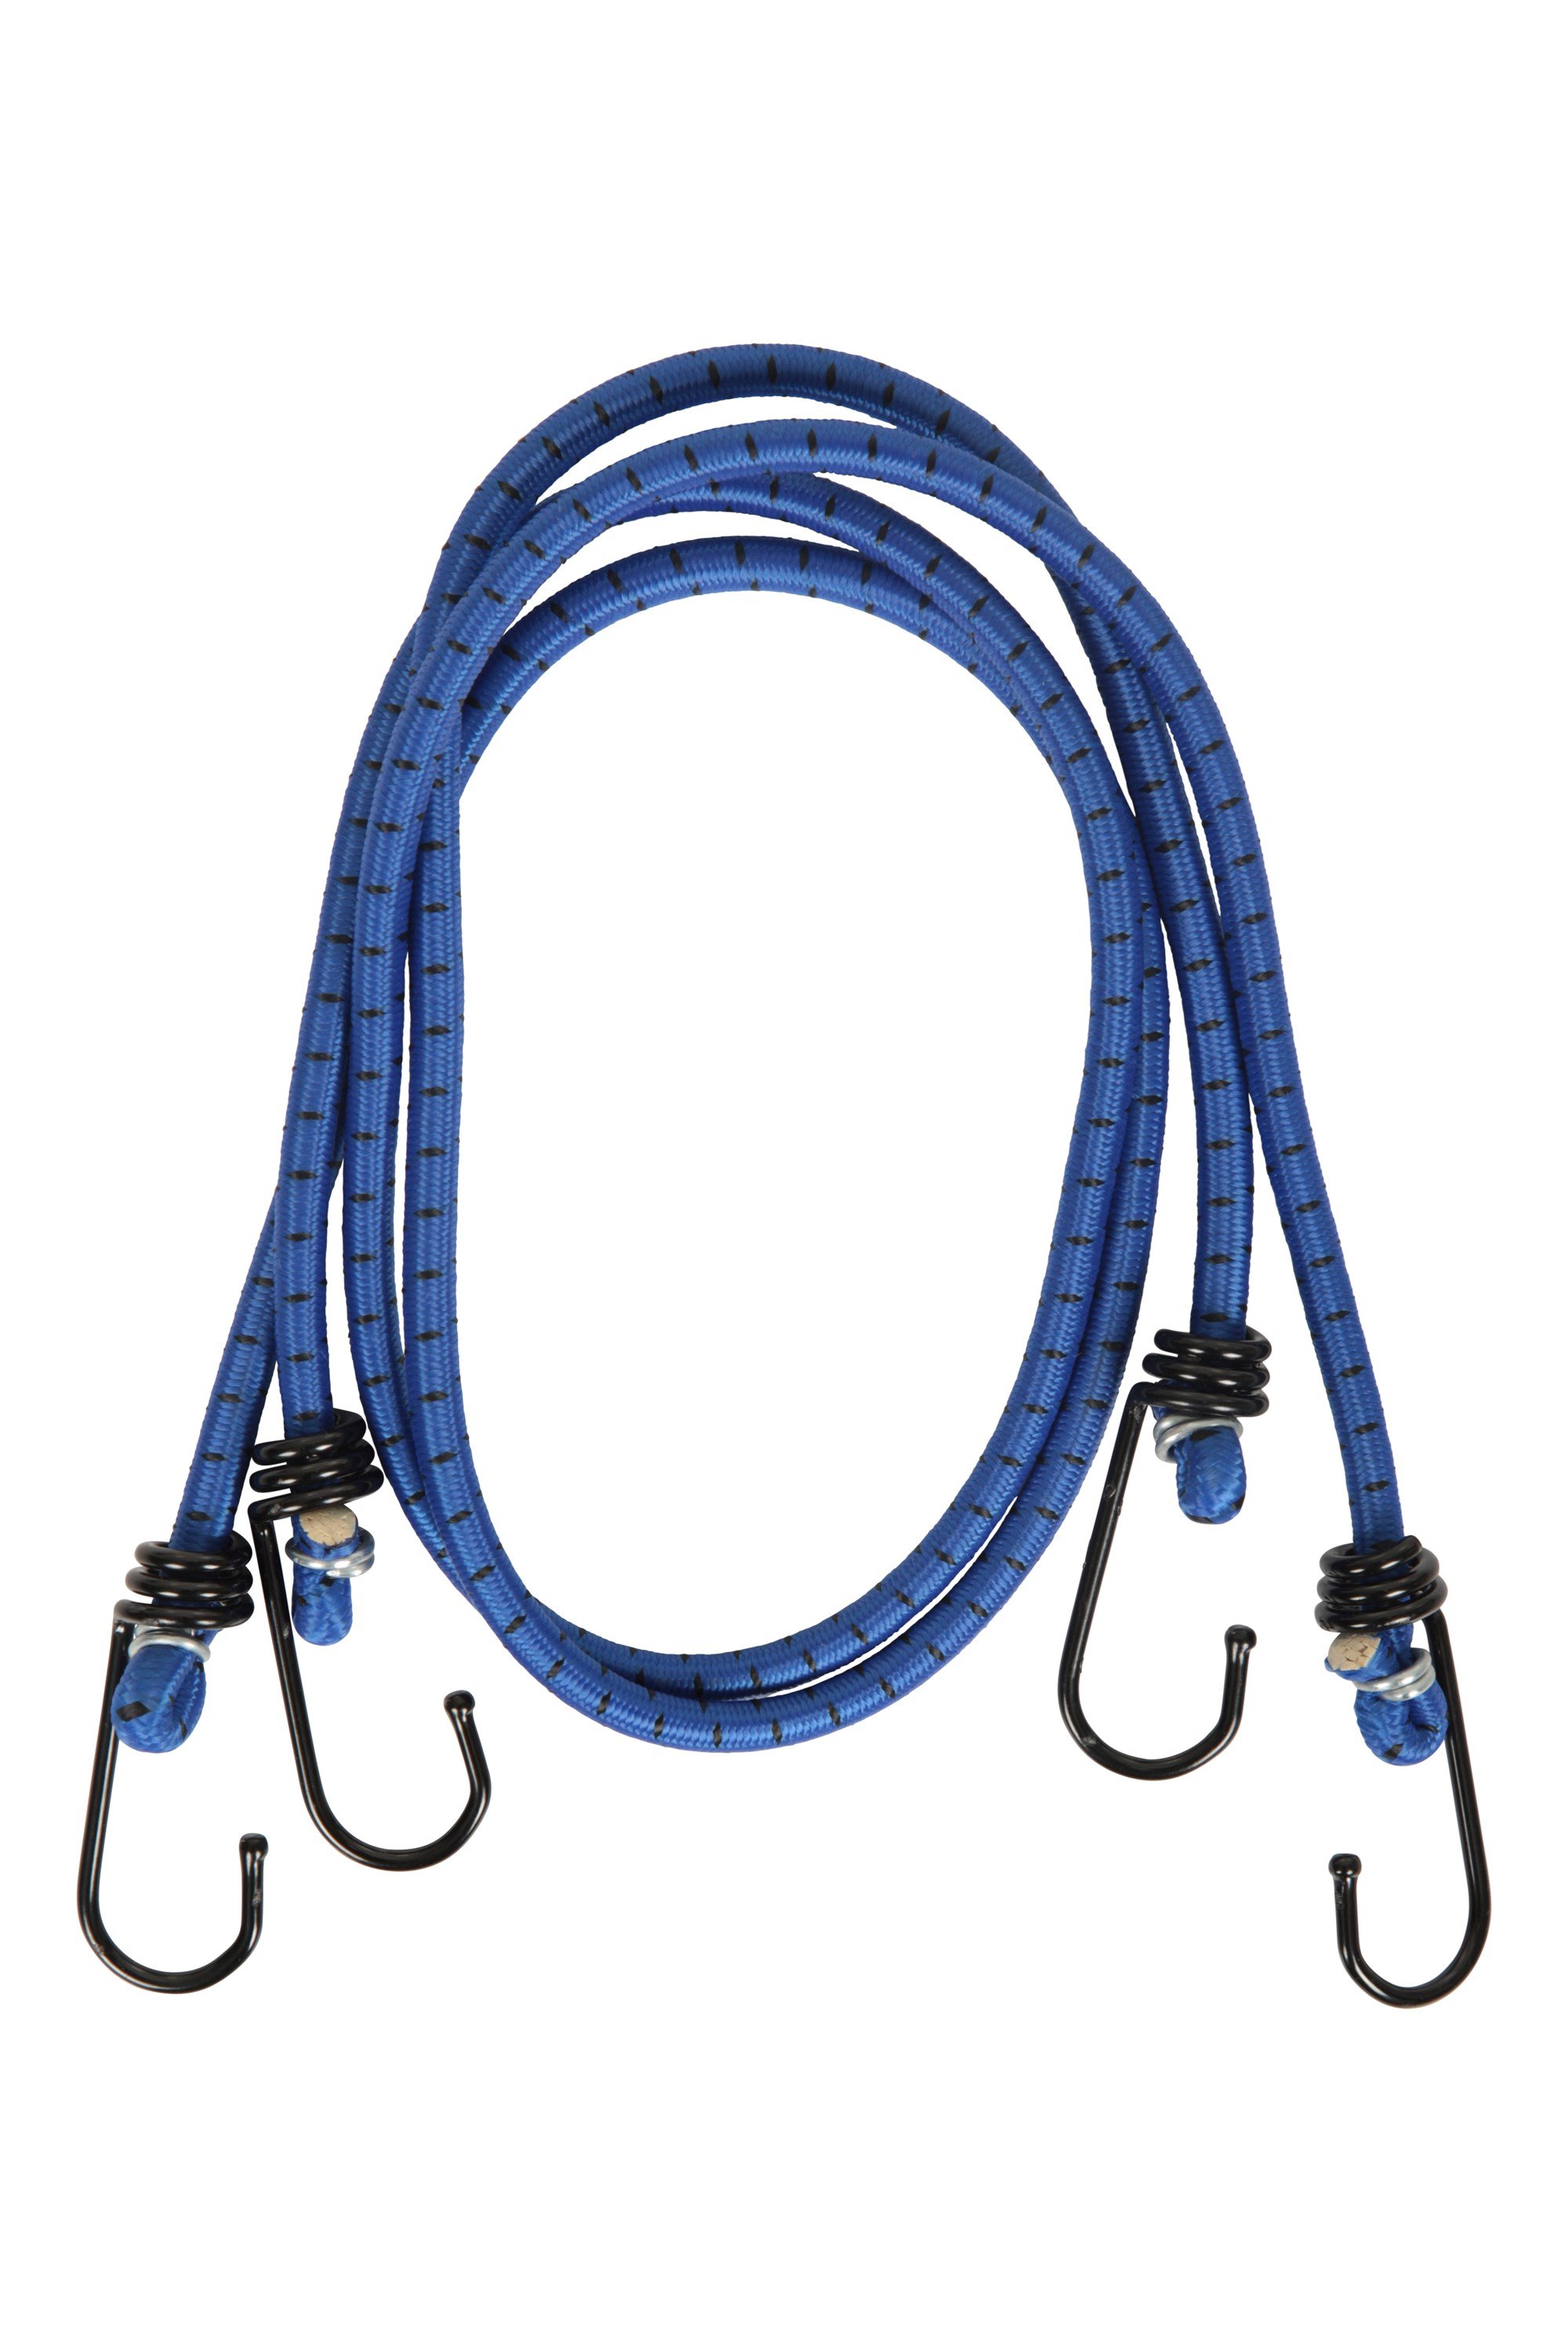 Bungee Cords - 2 Pack